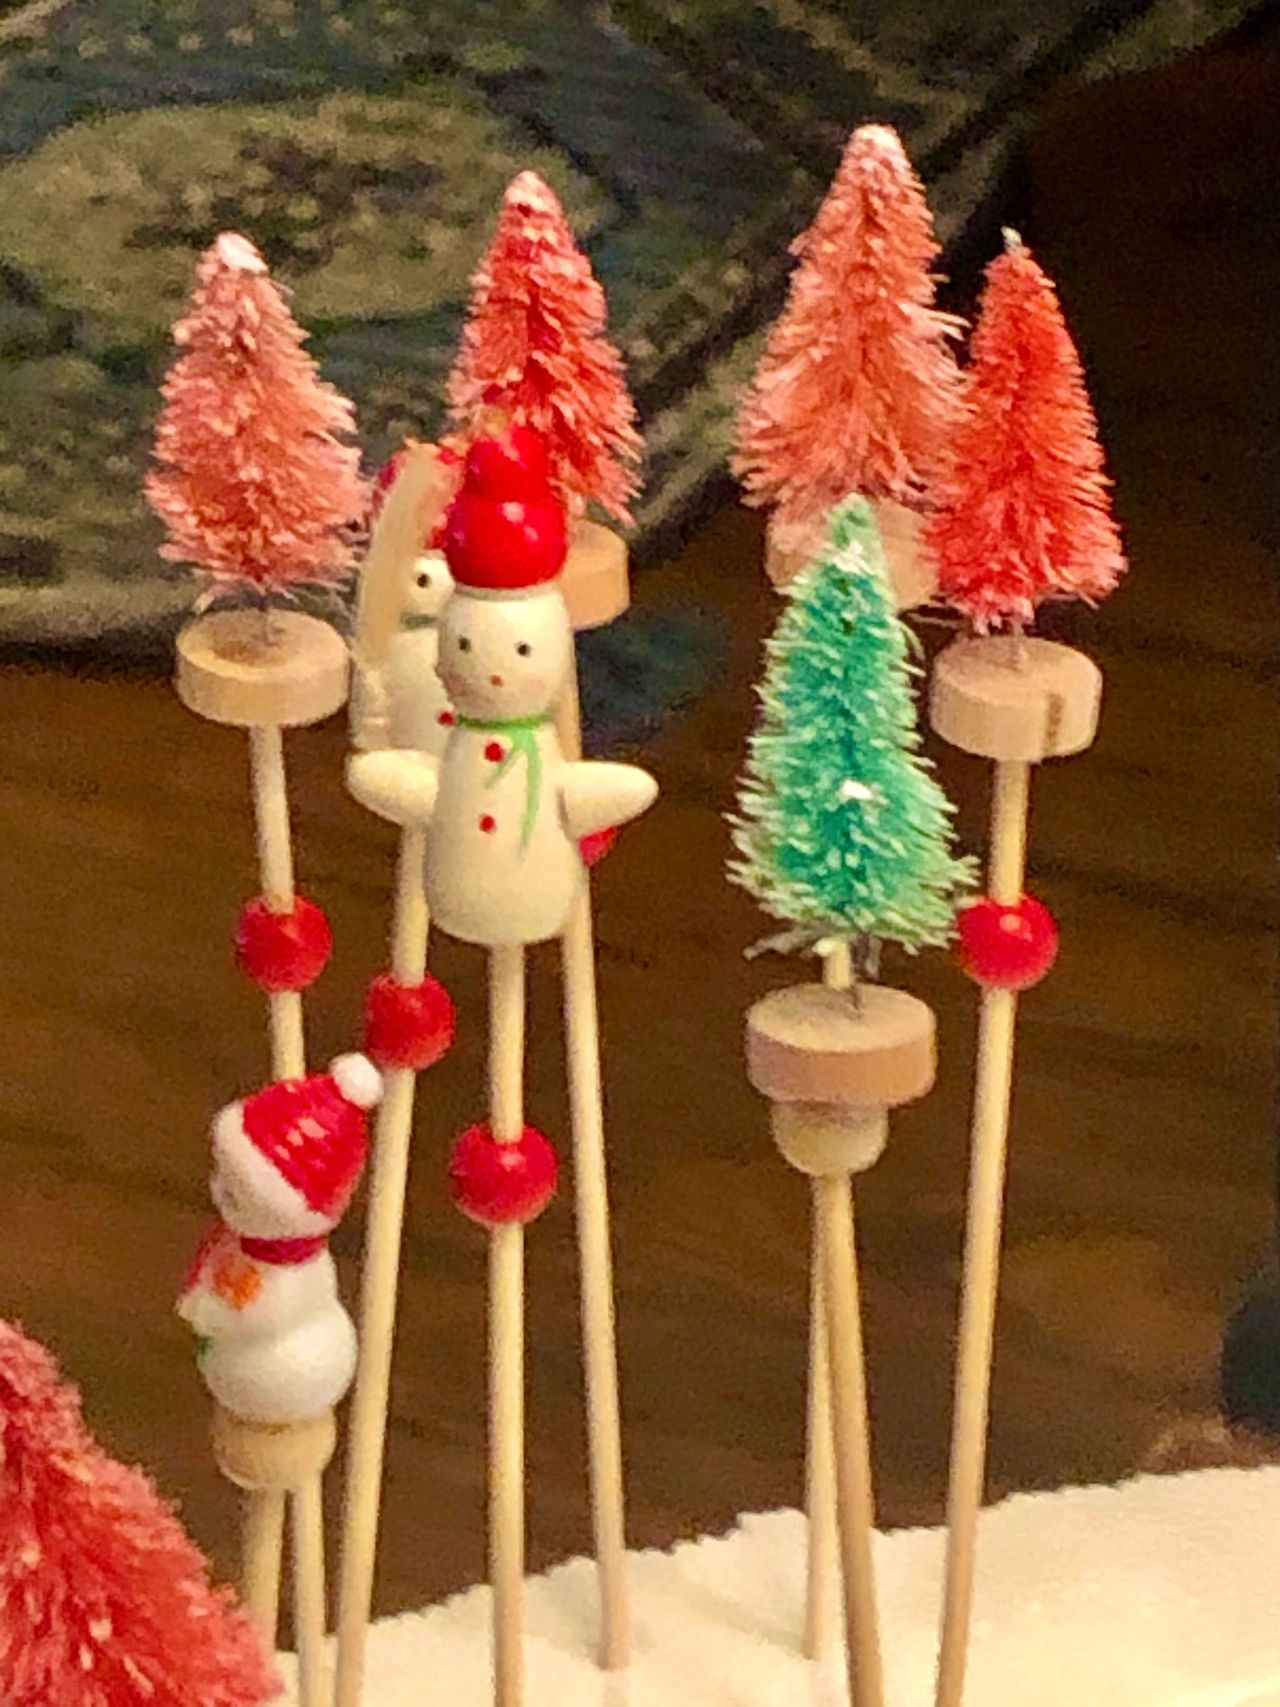 Miniature trees and snowman cocktail picks.